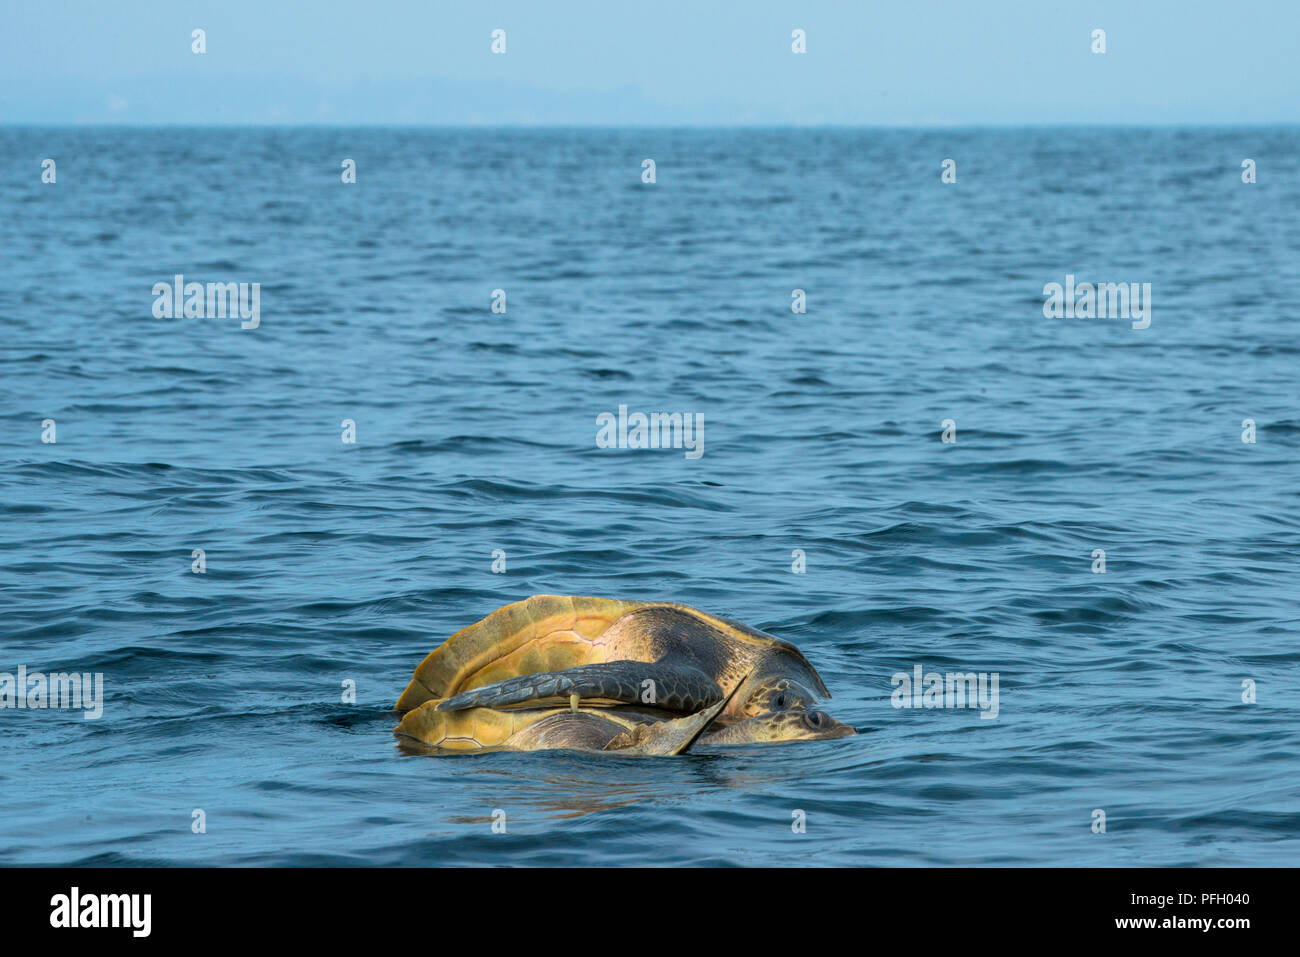 Male and female Olive Ridley Sea Turtles mating at the surface of the ocean off the coast of Galle, Sri Lanka. Stock Photo